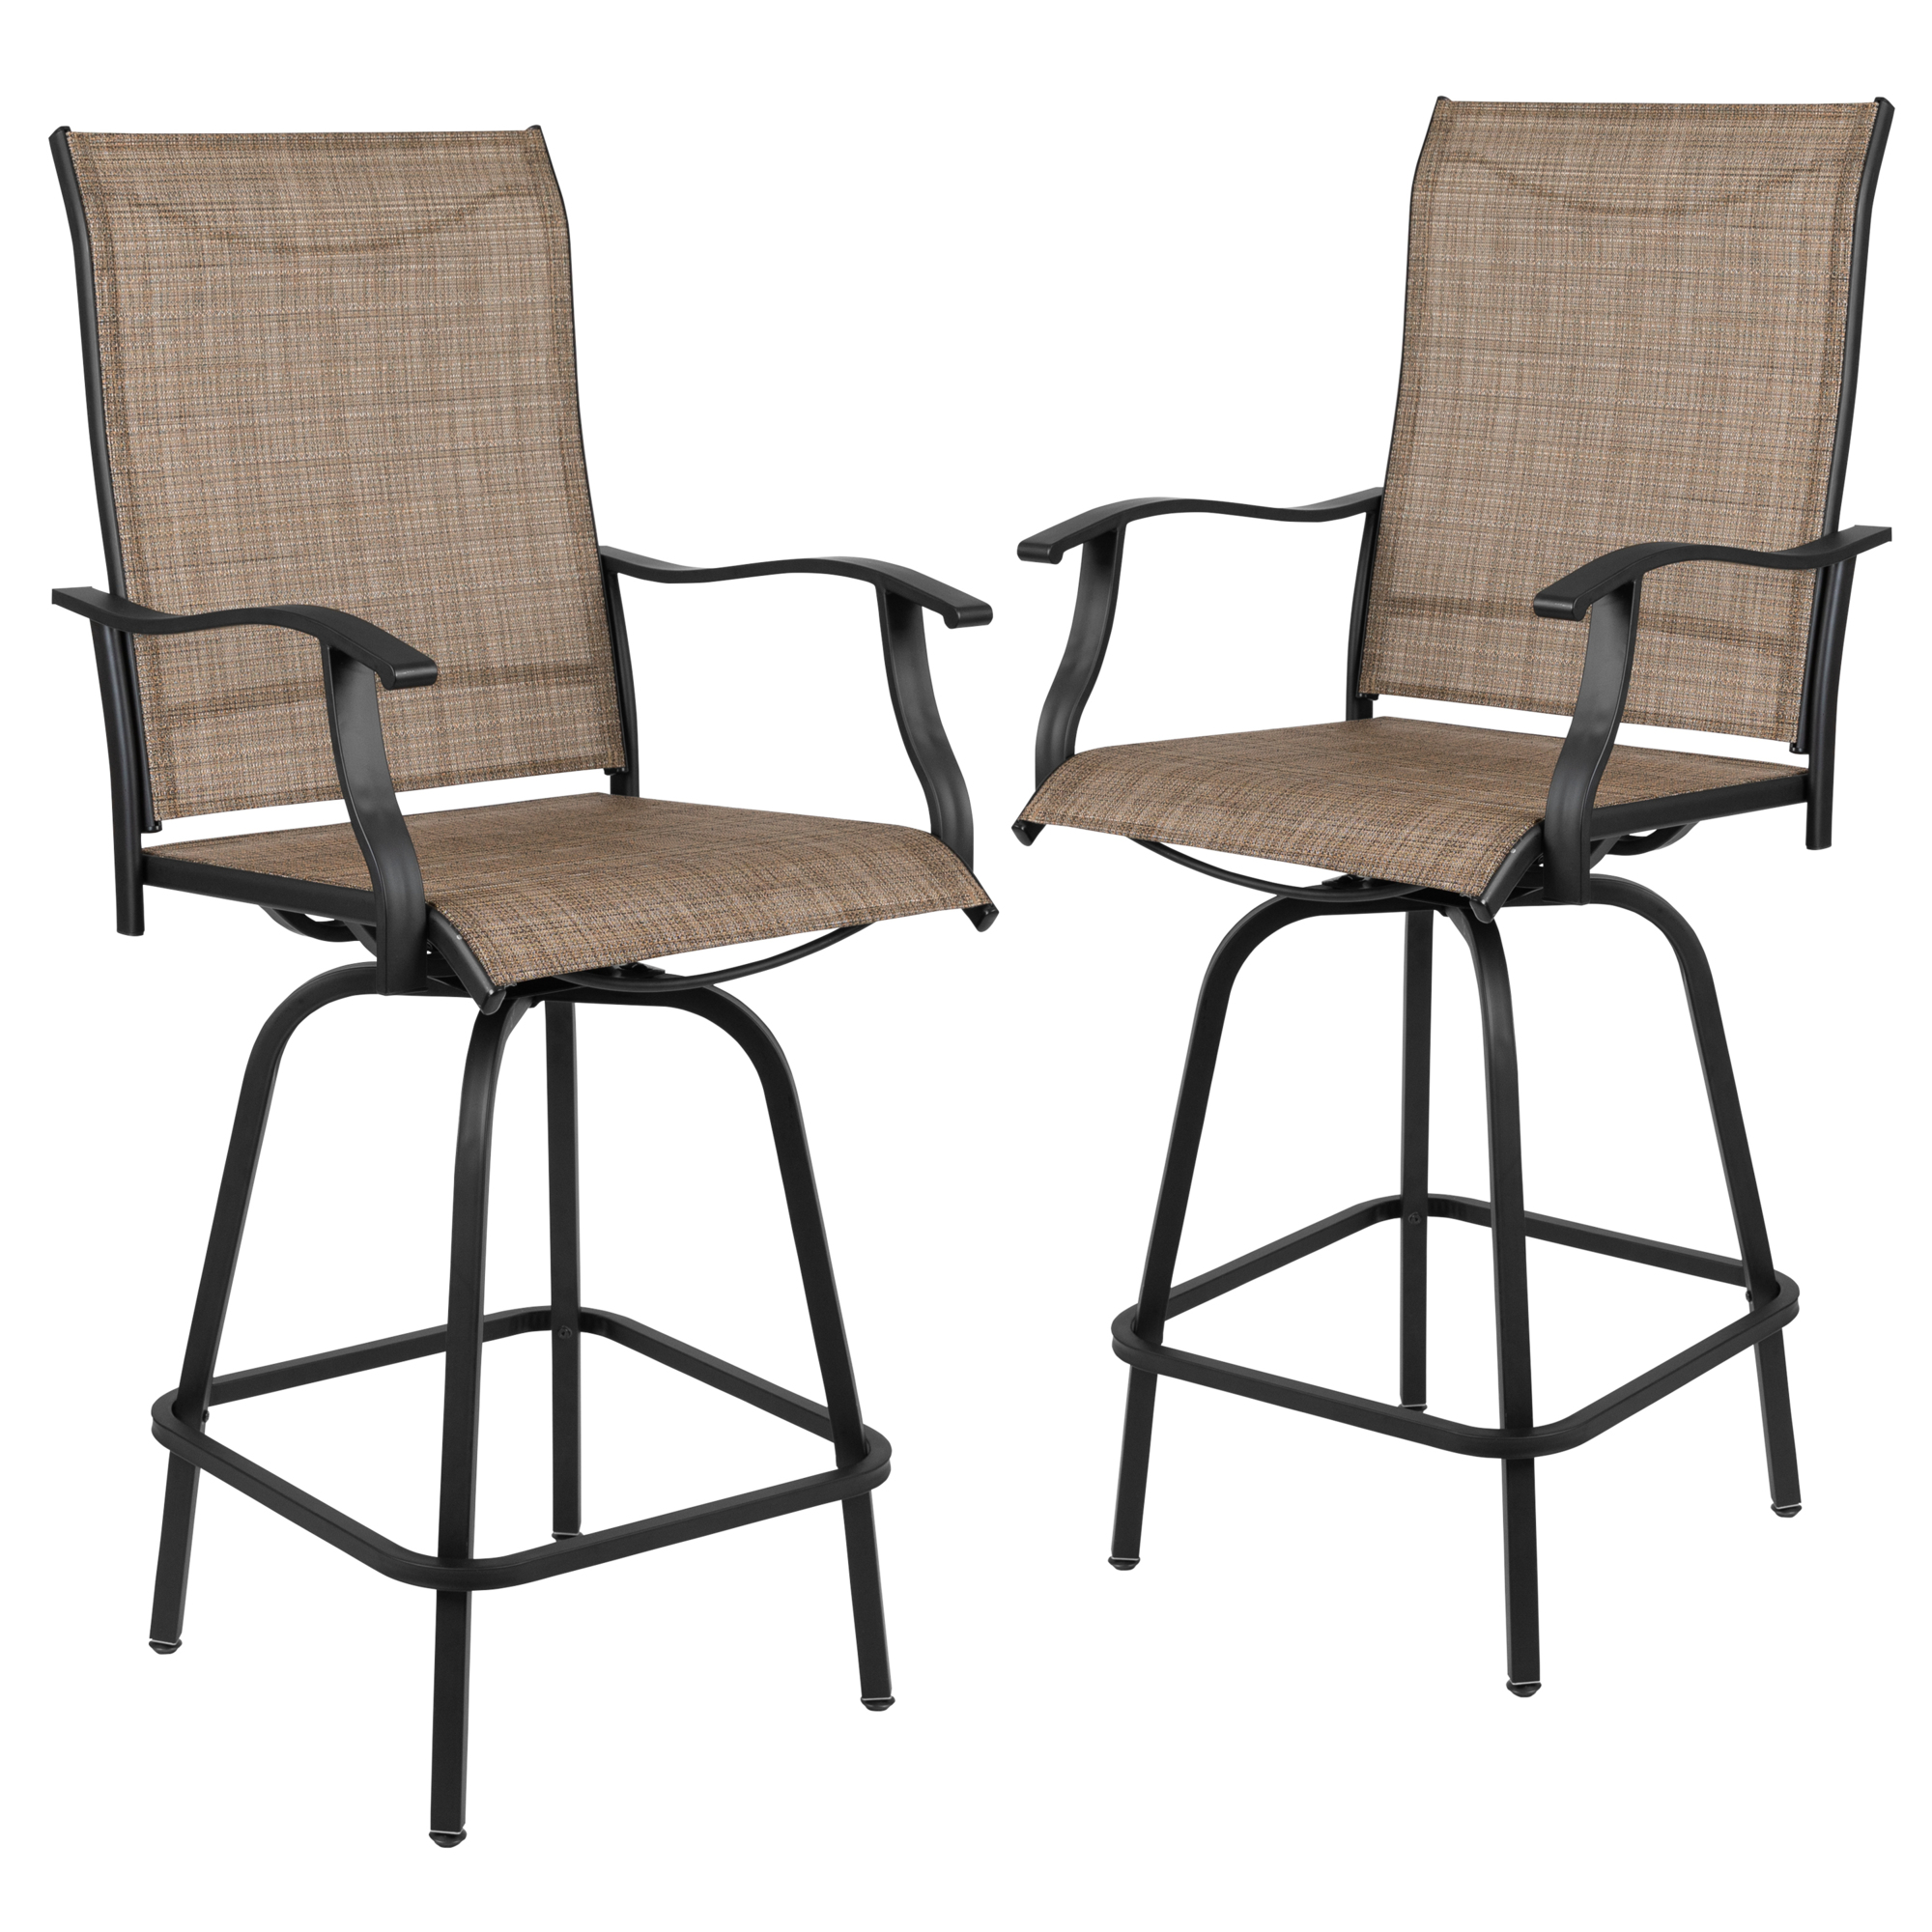 Flash Furniture, 2PK Outdoor Stool - 30Inch Patio Bar Stool, Brown, Primary Color Brown, Material Galvanized Steel, Width 22.5 in, Model 2ETSWVLPTO30